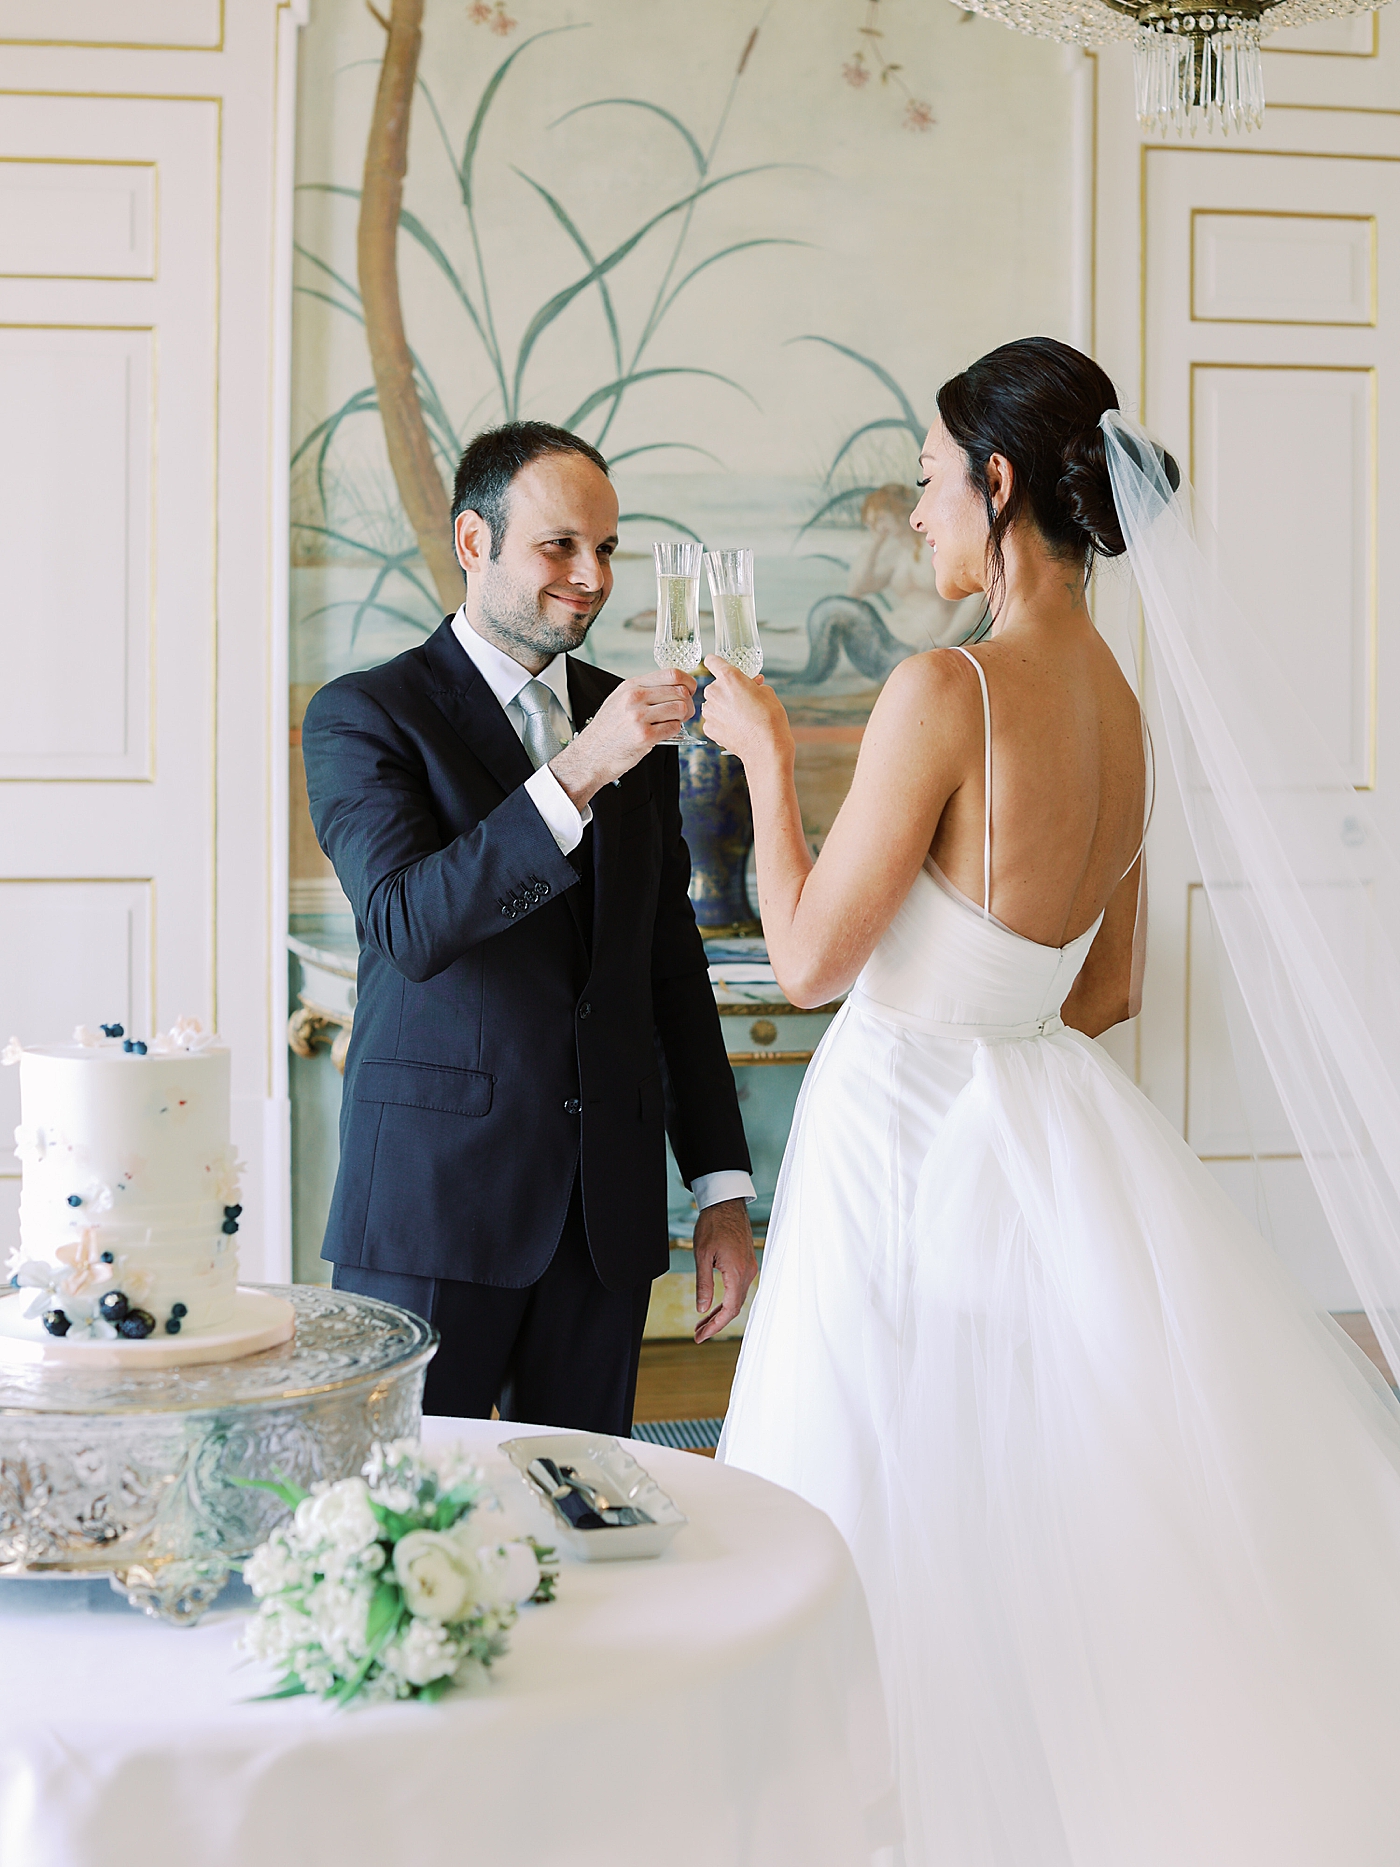 Bride and groom toasting after their Palácio de Seteais Elopement | Image by Diane Sotero Photography